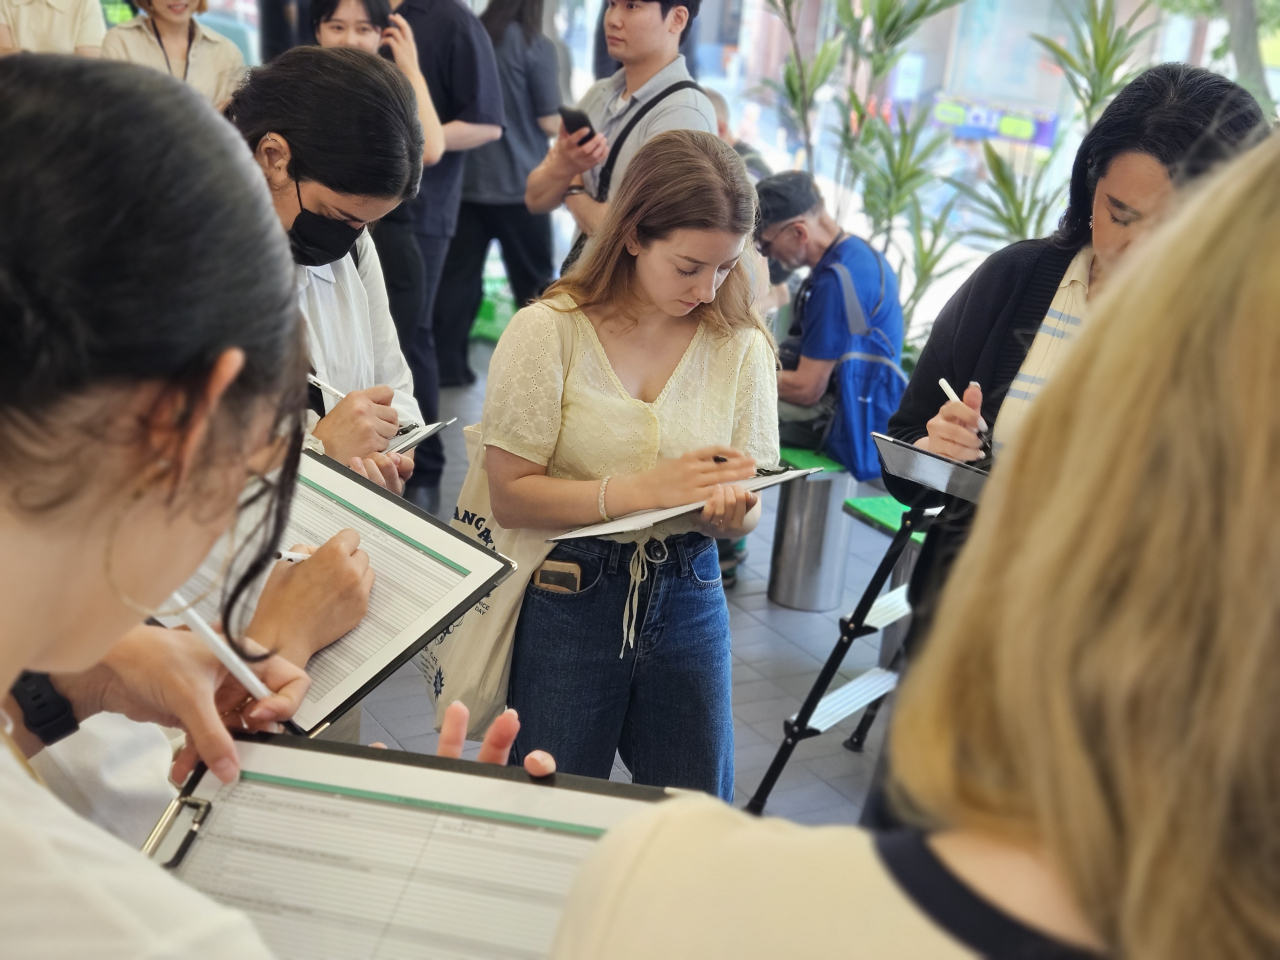 K-beauty docent program participants fill out a survey after an hourlong tour on Wednesday. (Kim Hae-yeon/The Korea Herald)